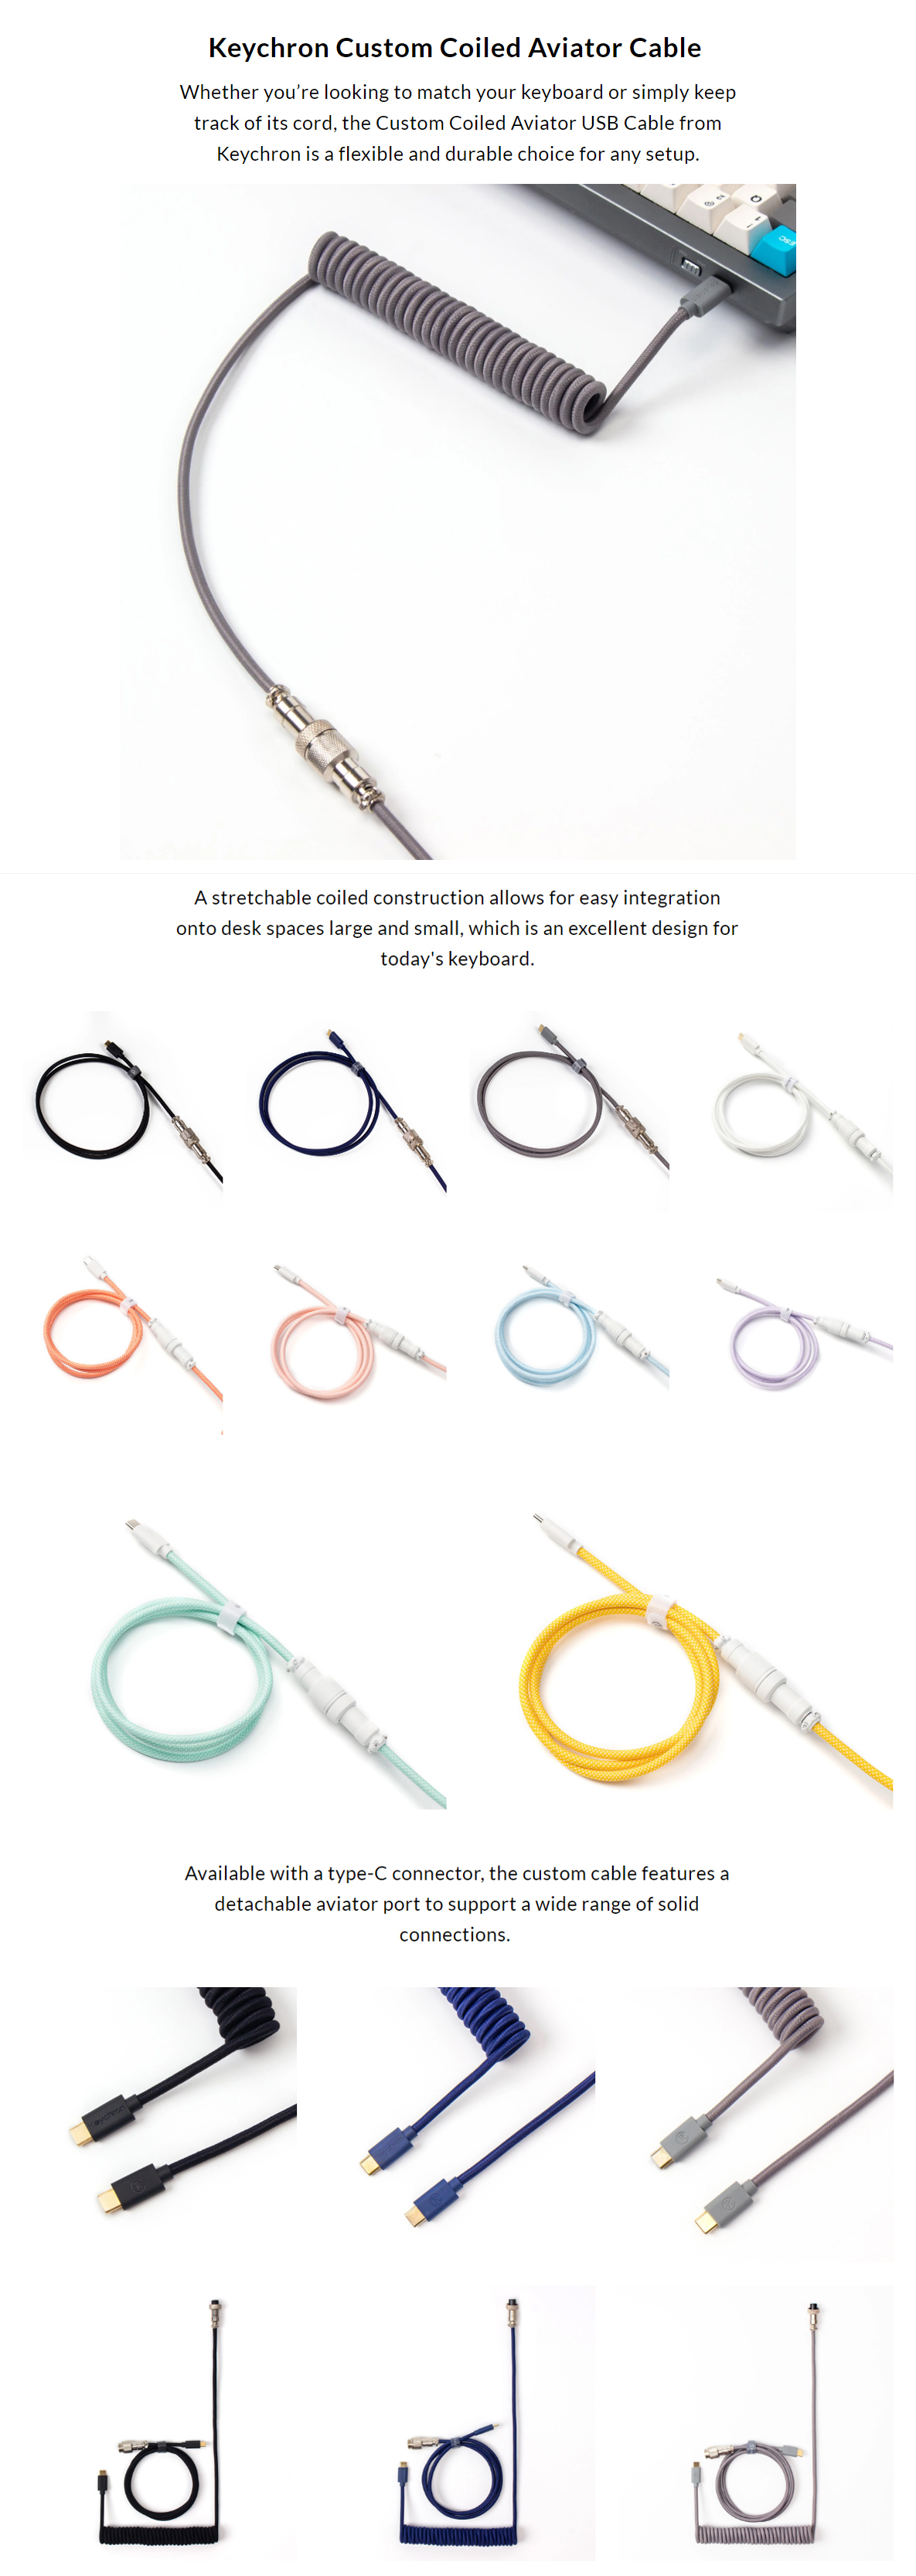 A large marketing image providing additional information about the product Keychron Custom Coiled Aviator Cable - Light Purple - Additional alt info not provided